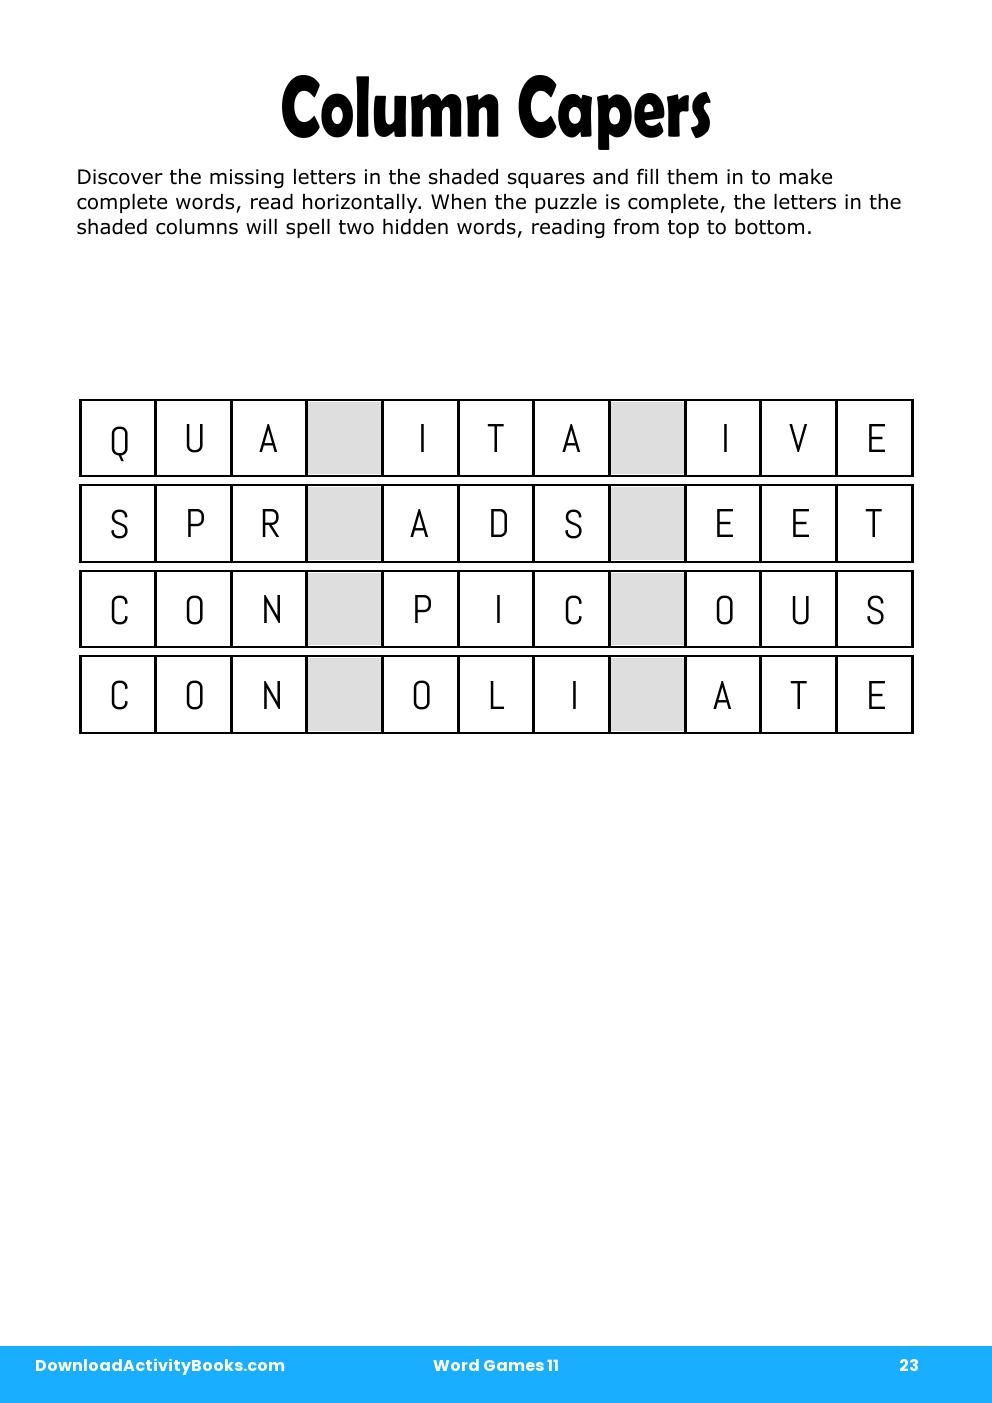 Column Capers in Word Games 11